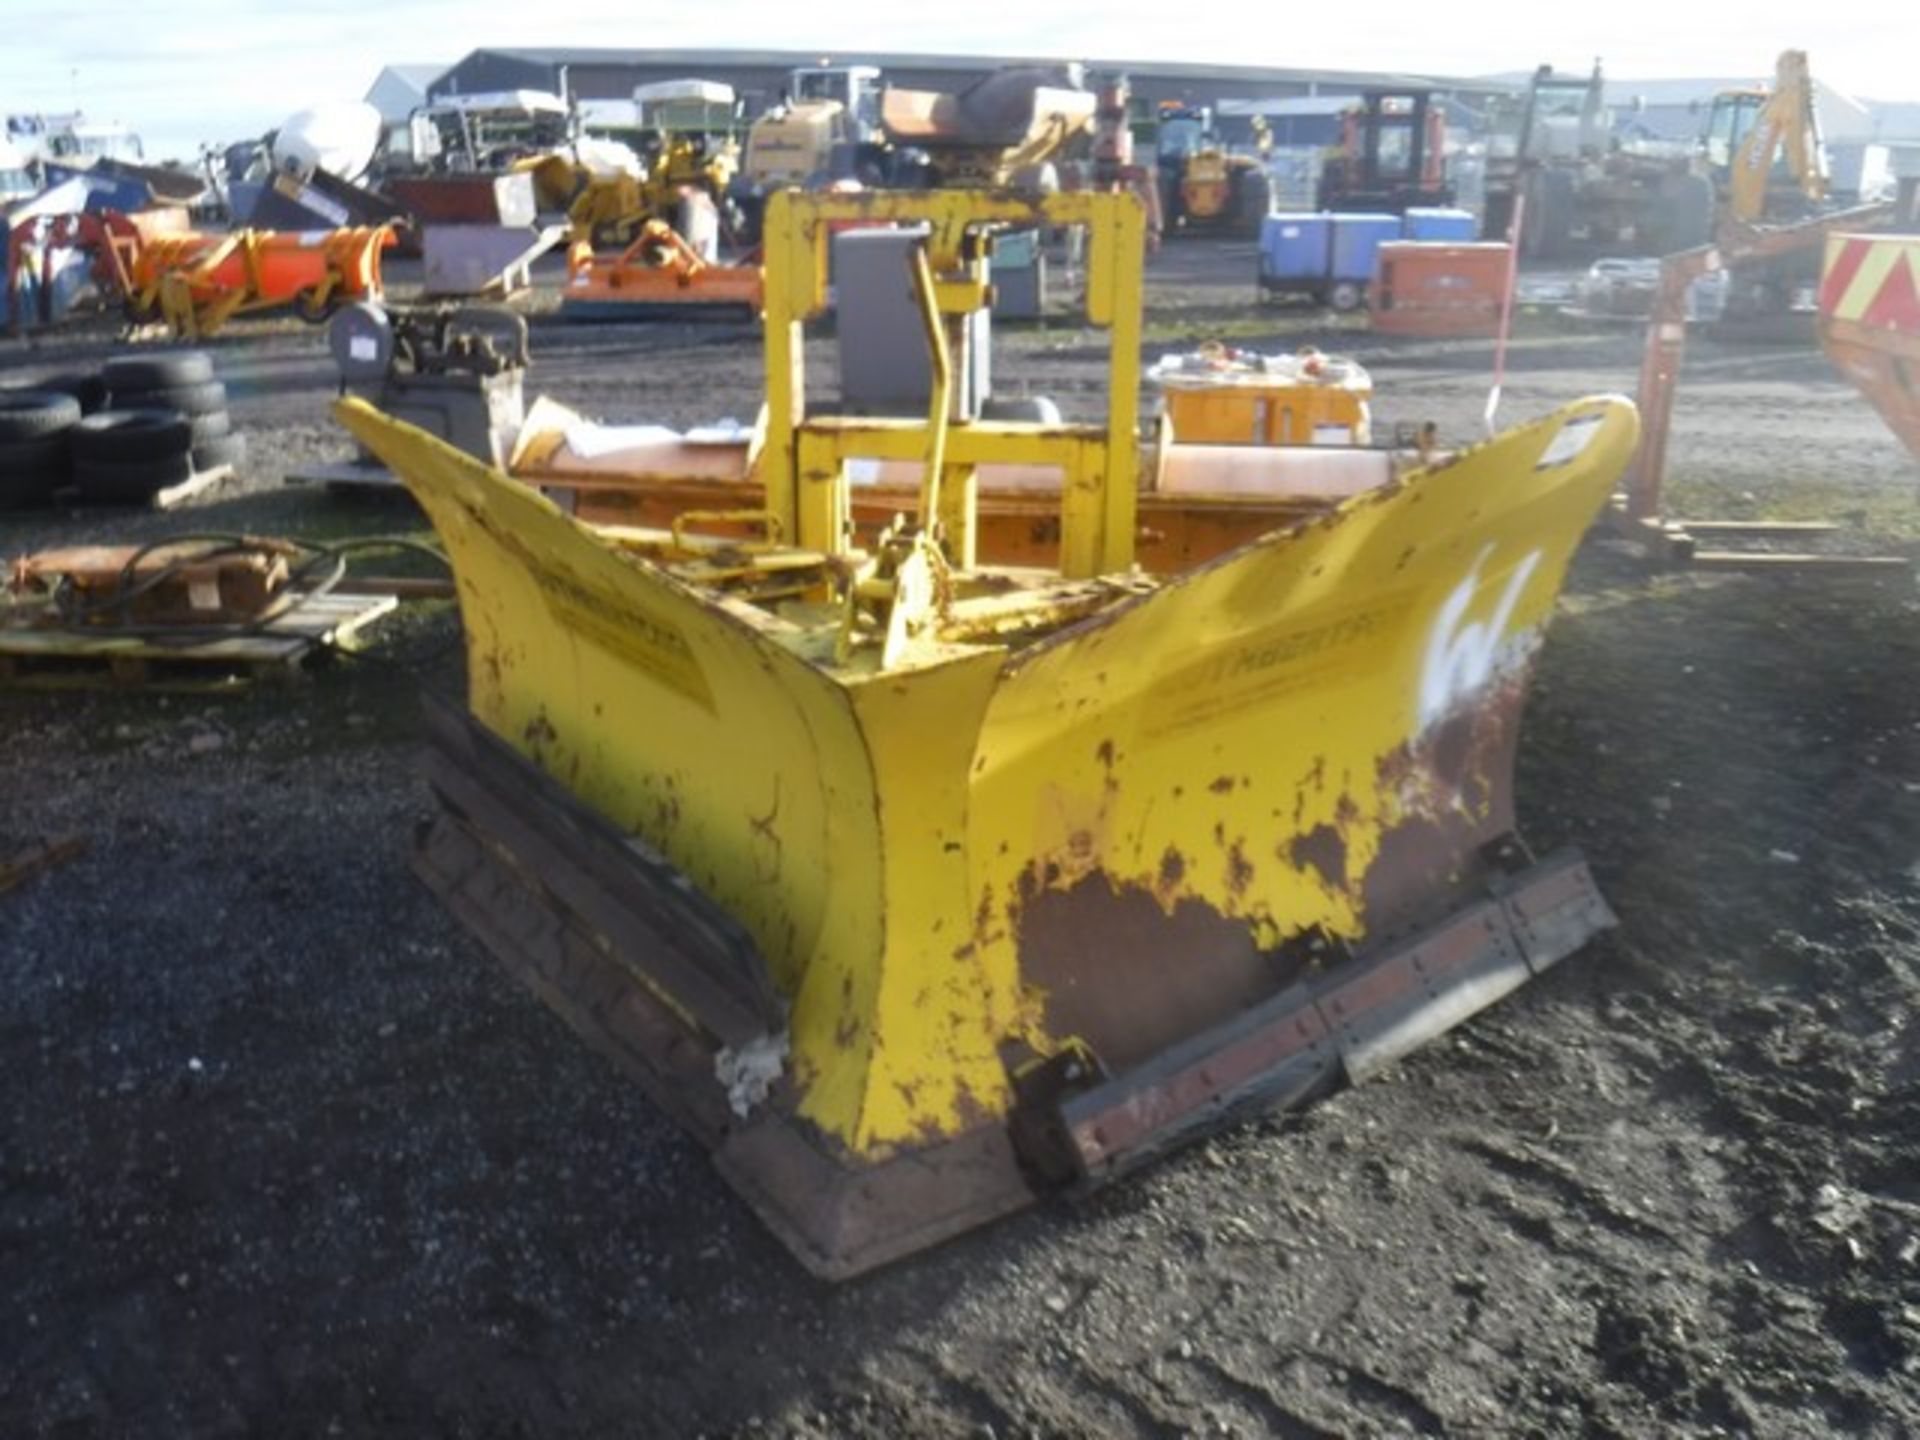 CUTHBERTSON VEE snow plough lorry mounting